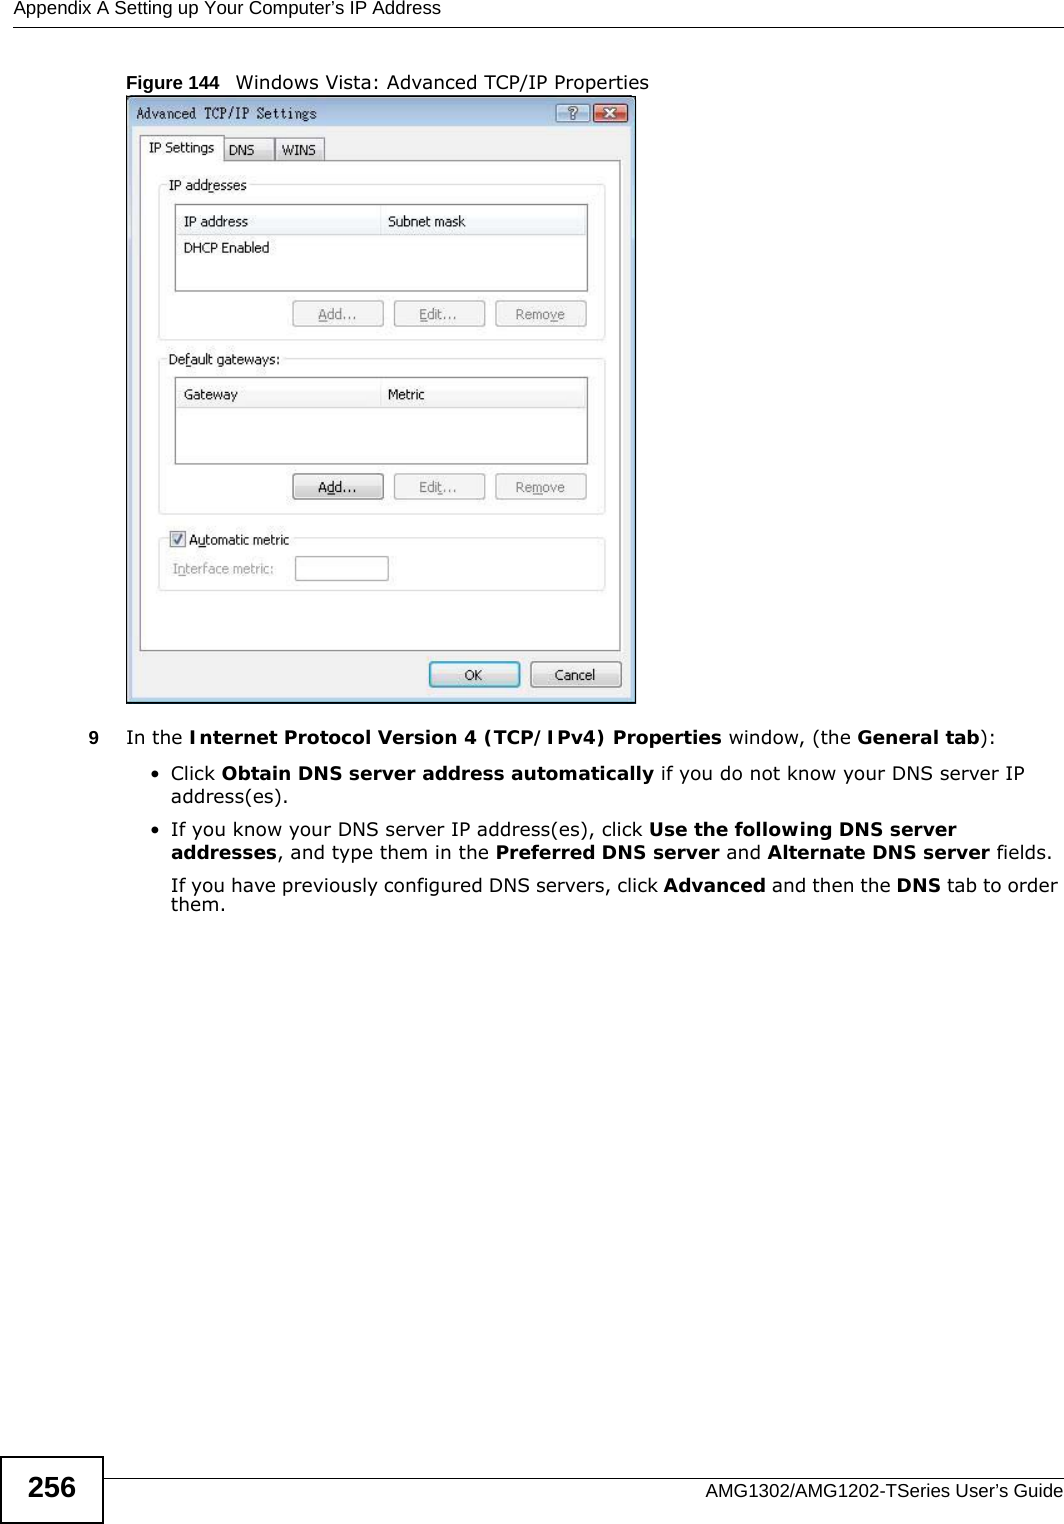 Appendix A Setting up Your Computer’s IP AddressAMG1302/AMG1202-TSeries User’s Guide256Figure 144   Windows Vista: Advanced TCP/IP Properties9In the Internet Protocol Version 4 (TCP/IPv4) Properties window, (the General tab):• Click Obtain DNS server address automatically if you do not know your DNS server IP address(es).• If you know your DNS server IP address(es), click Use the following DNS server addresses, and type them in the Preferred DNS server and Alternate DNS server fields. If you have previously configured DNS servers, click Advanced and then the DNS tab to order them.